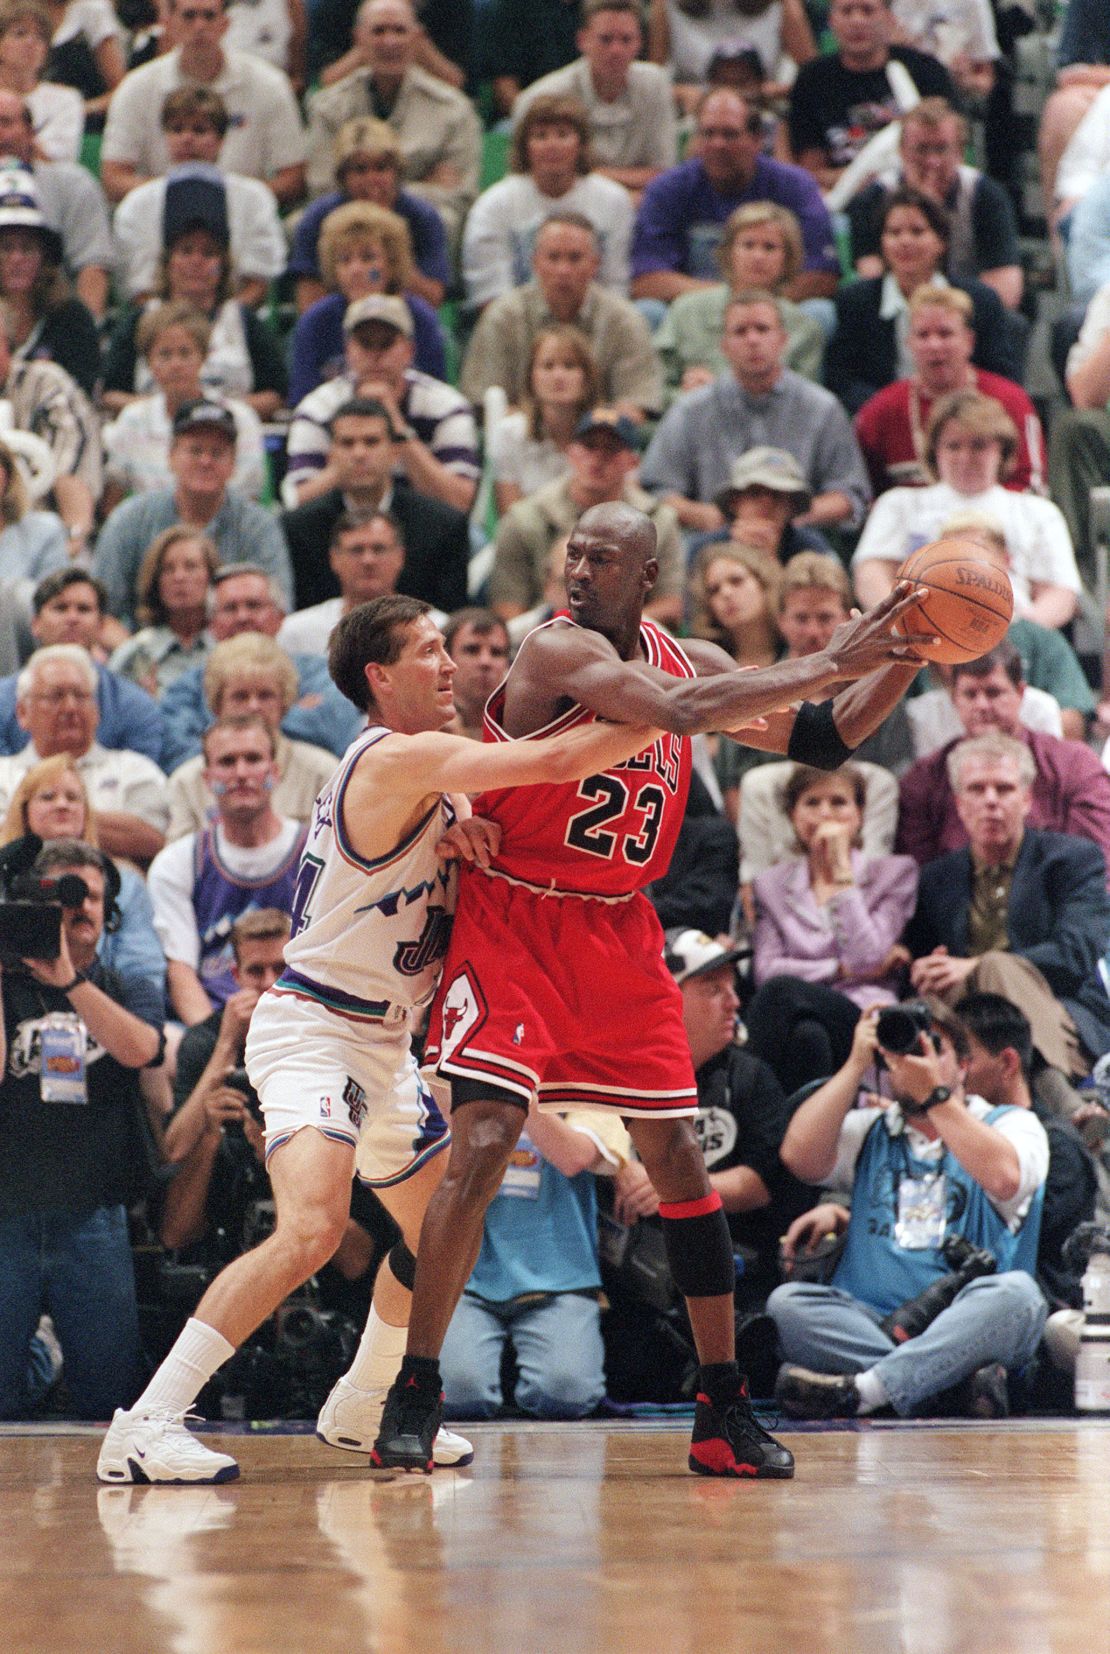 Jordan -- seen here playing in the 1998 Finals against Jeff Hornacek of the Utah Jazz -- is widely recognized to be the greatest player in the history of the NBA.